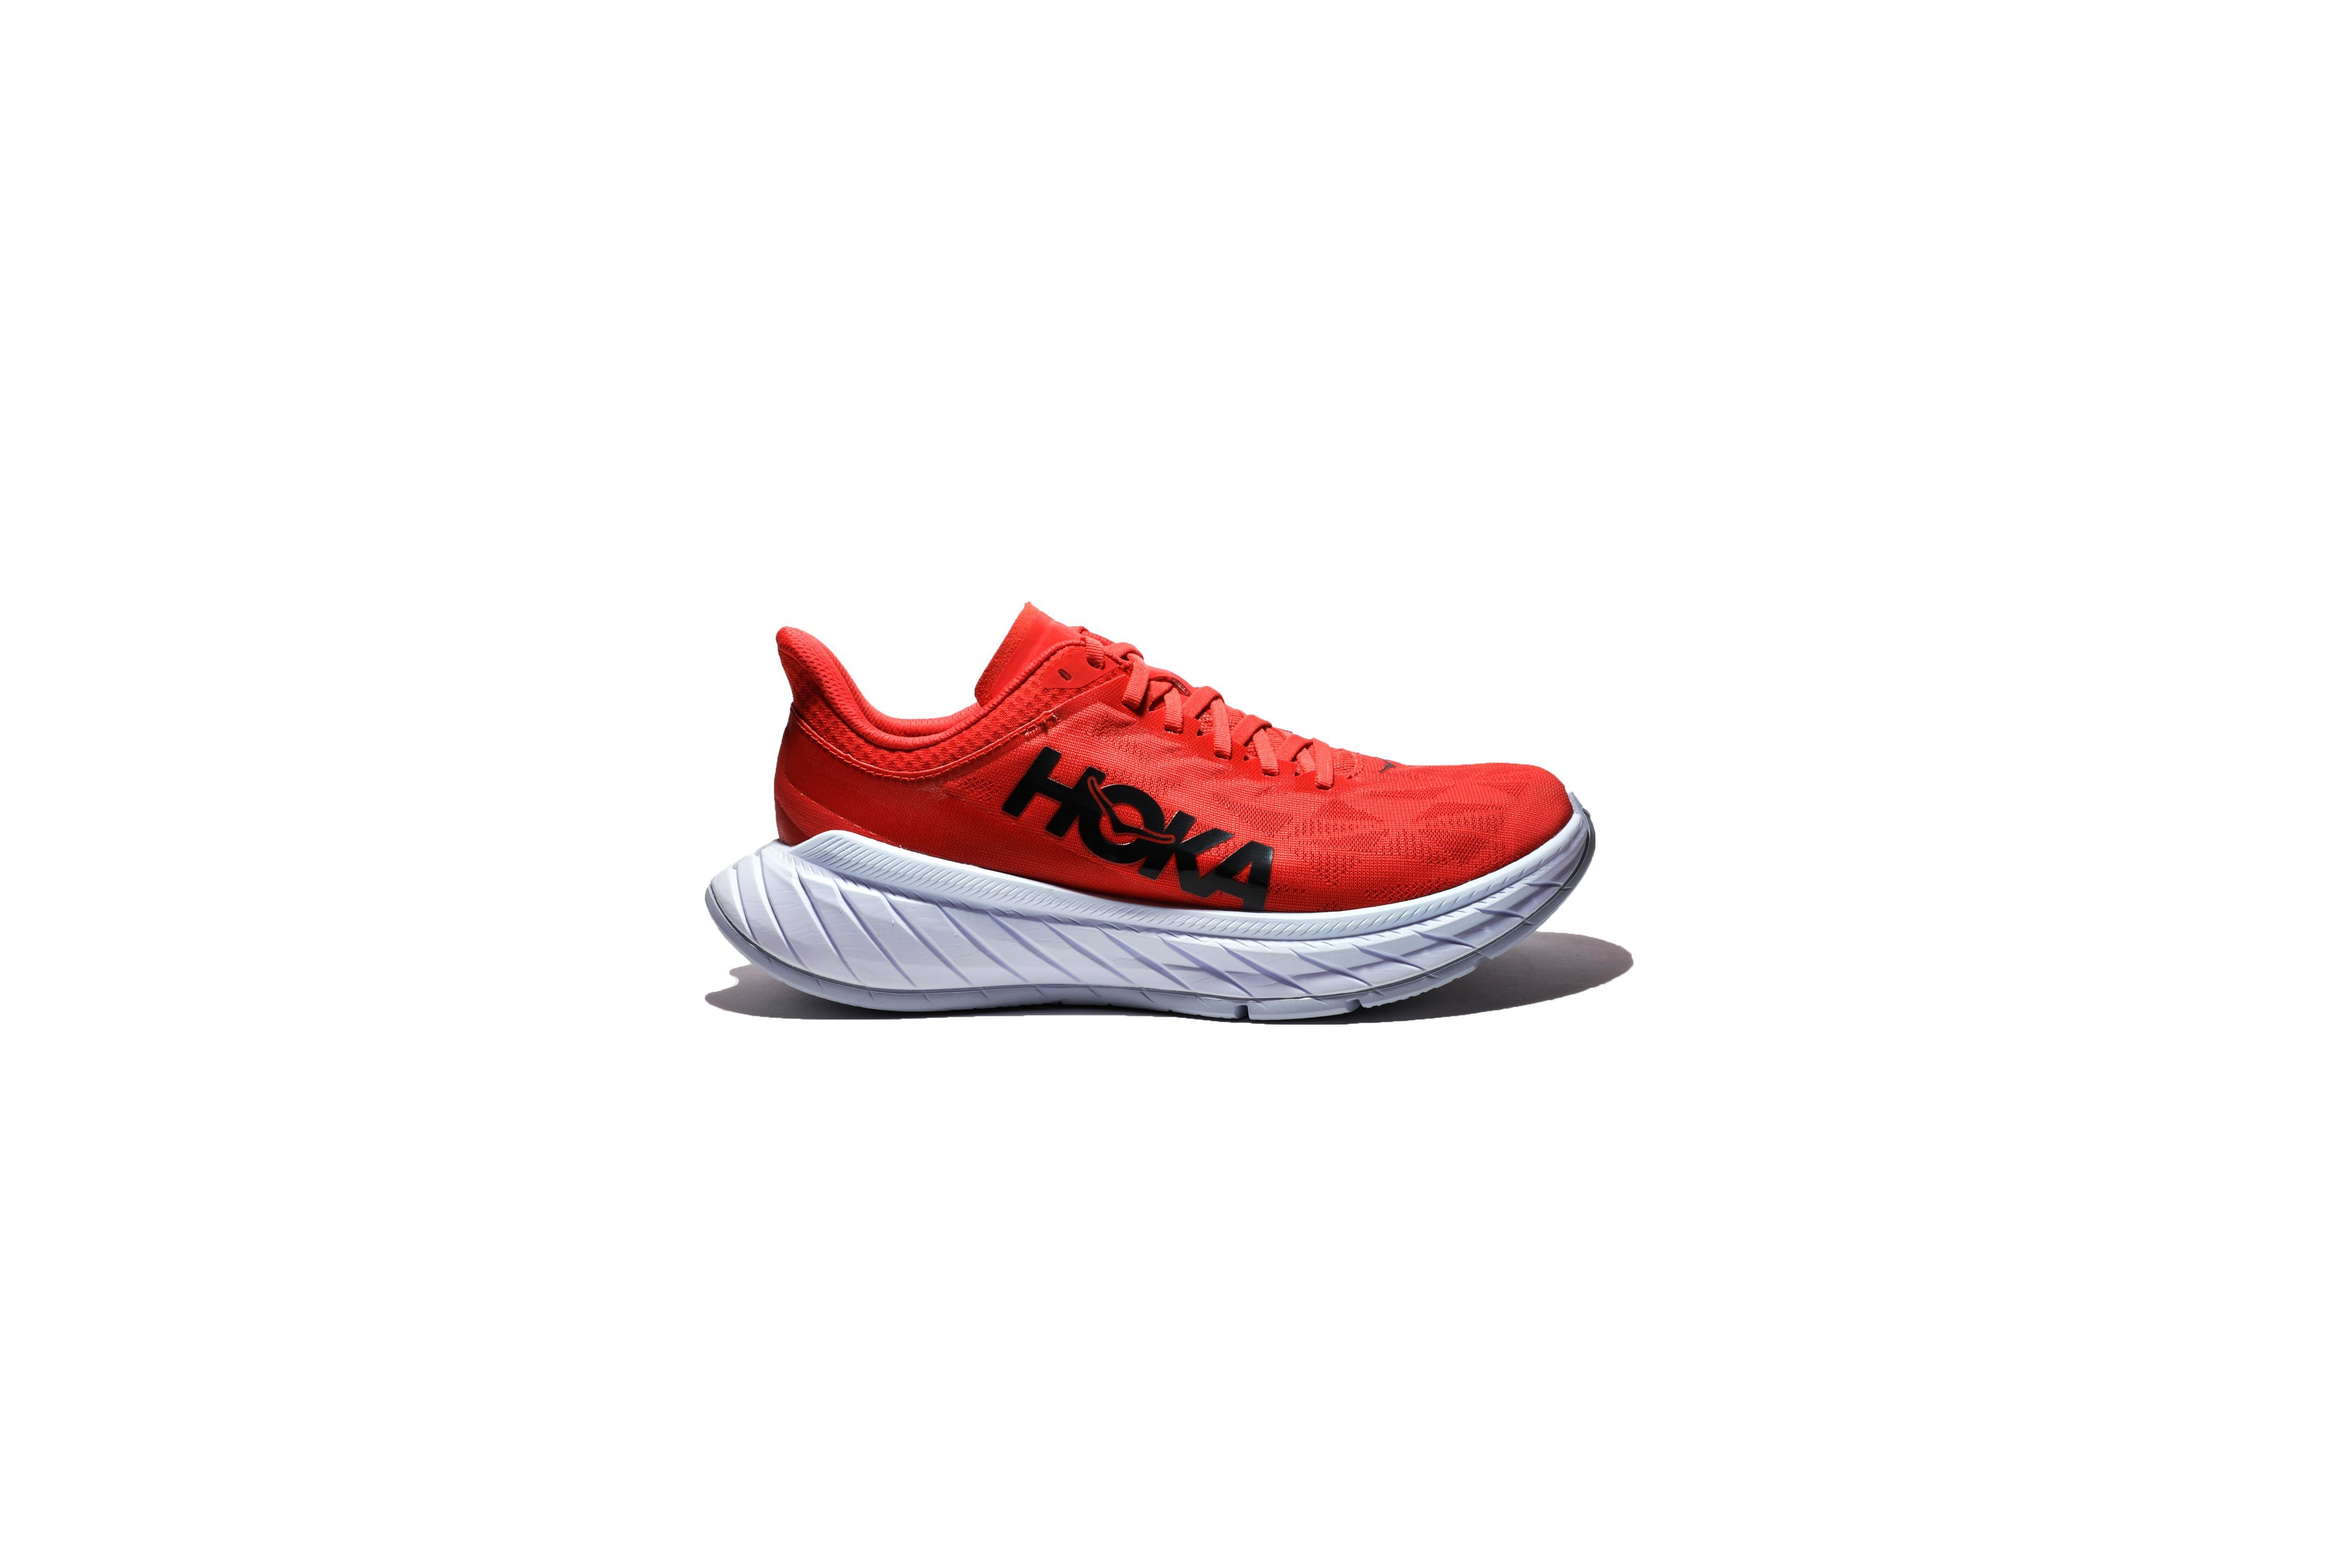 Hoka One One Carbon X 2 Review | 2021 Running Shoes for Racing